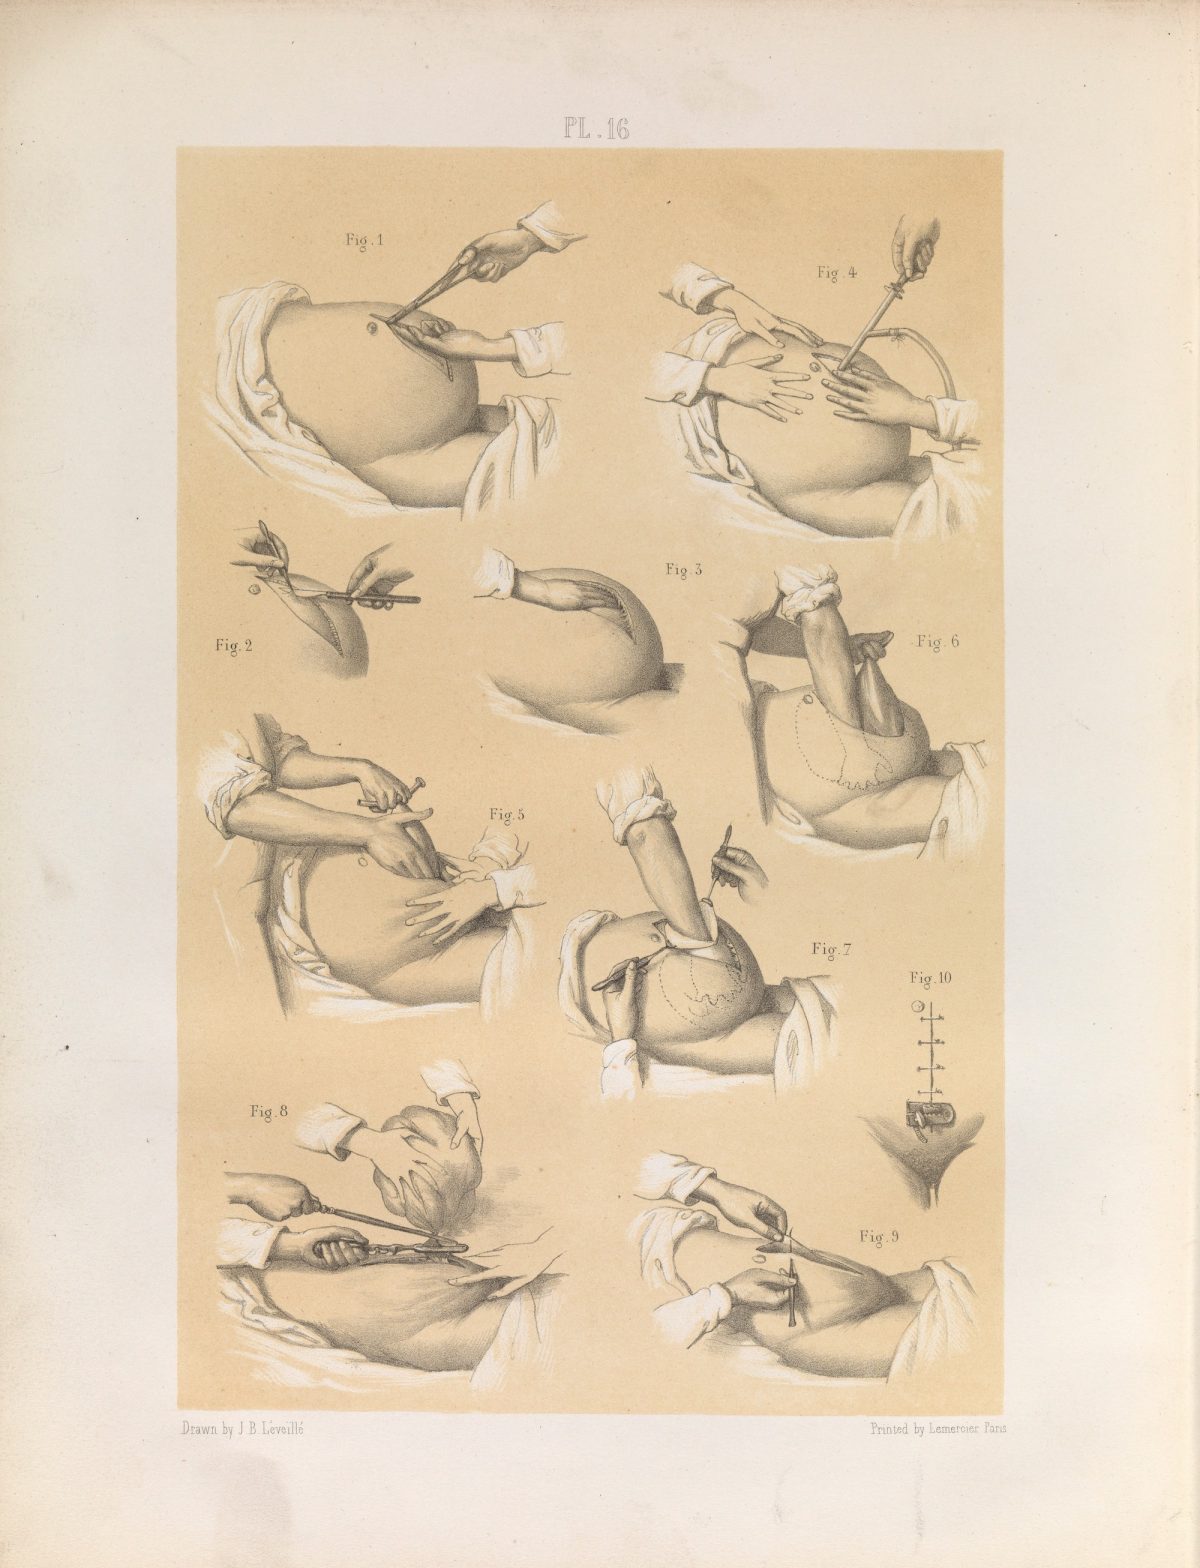 Plate 16. Various operative stages of the removal of a tumour from the uterus.